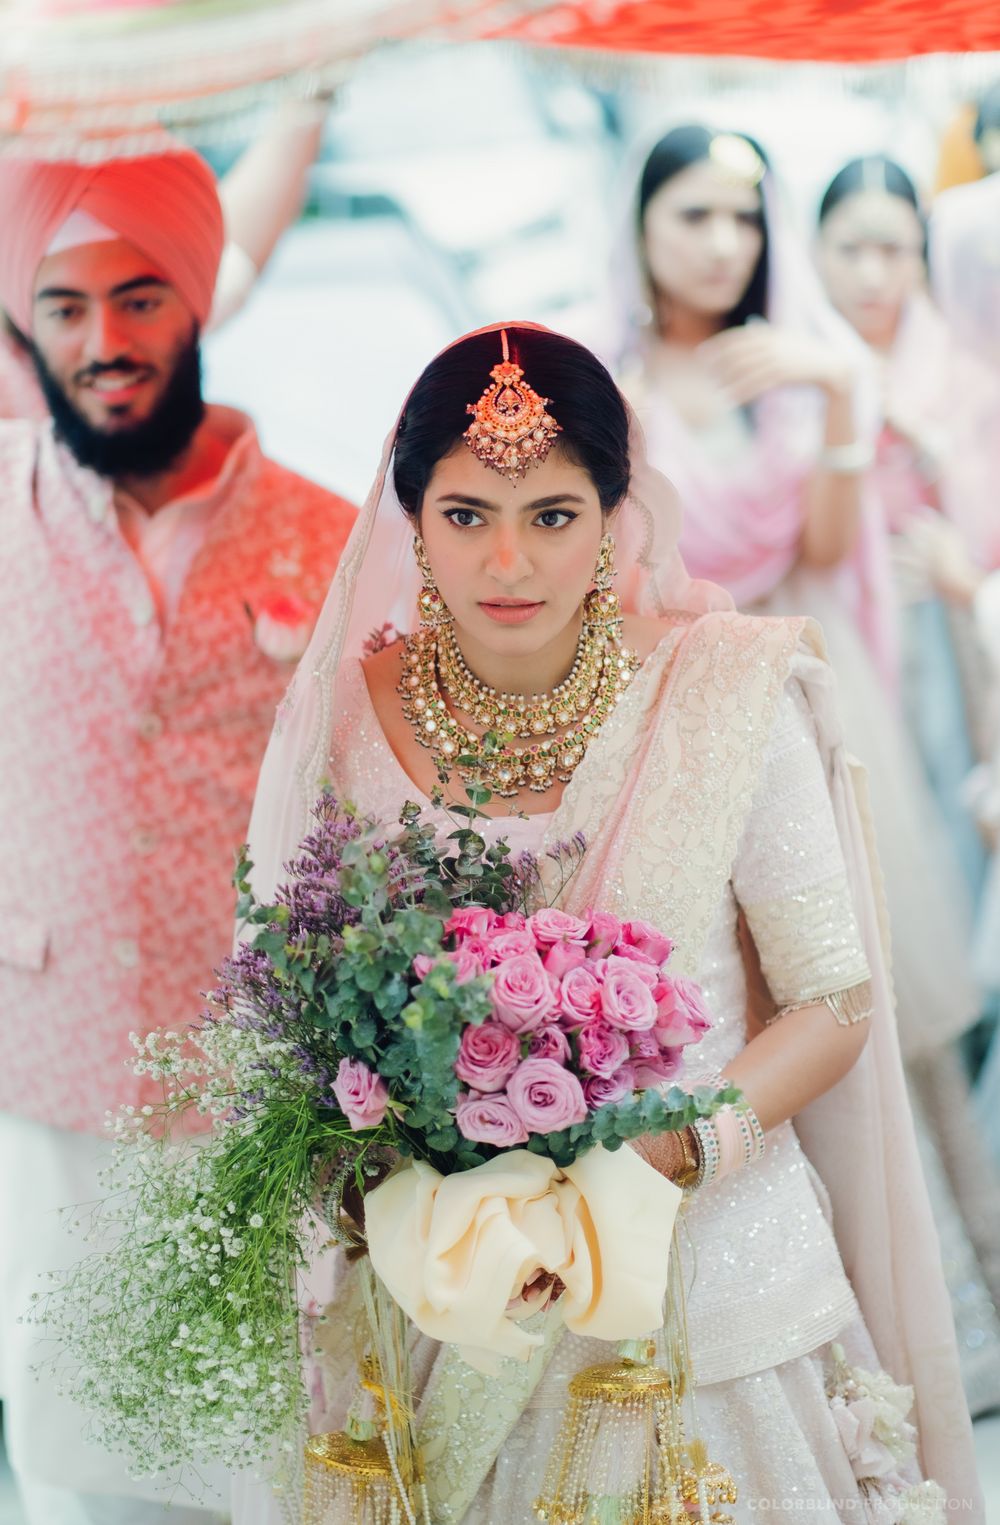 Photo of sikh pastel bride entering her wedding holding a bouquet